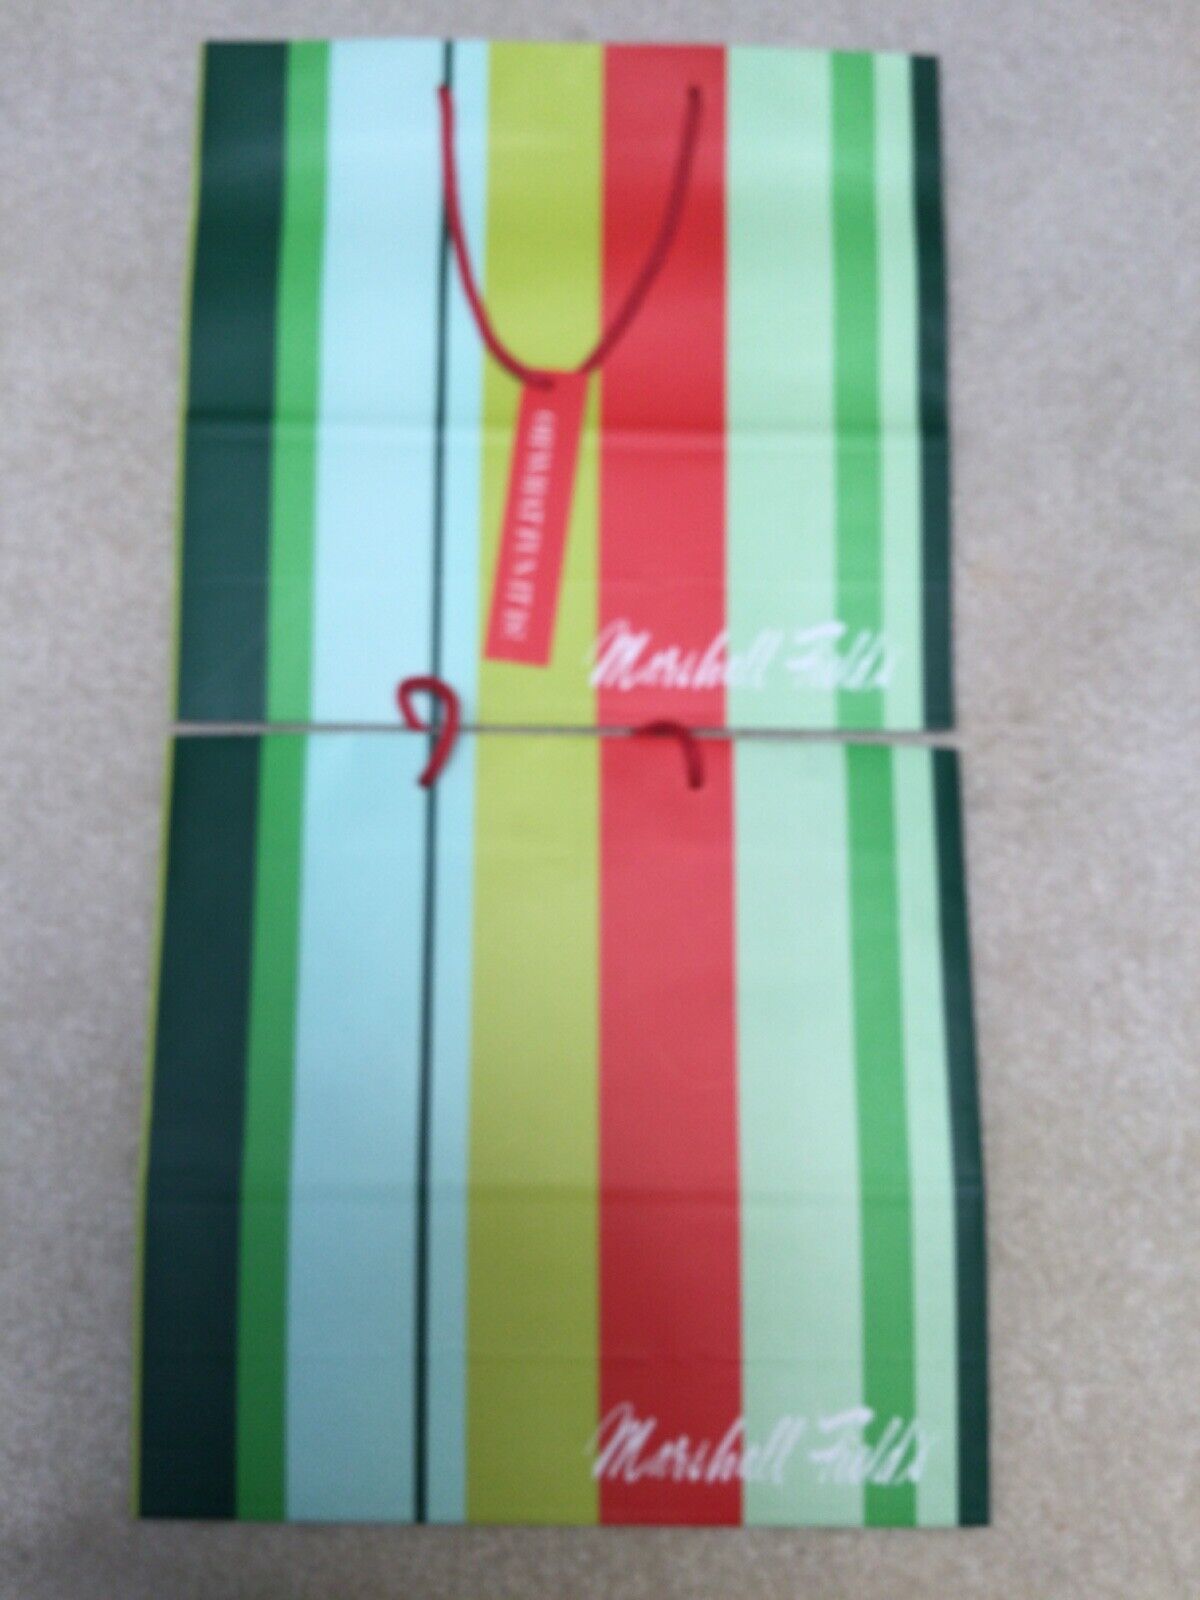 2 Green/Red Striped Marshall Field\'s Paper Bags 10.75” H. x 11.5” L x 4” W. each